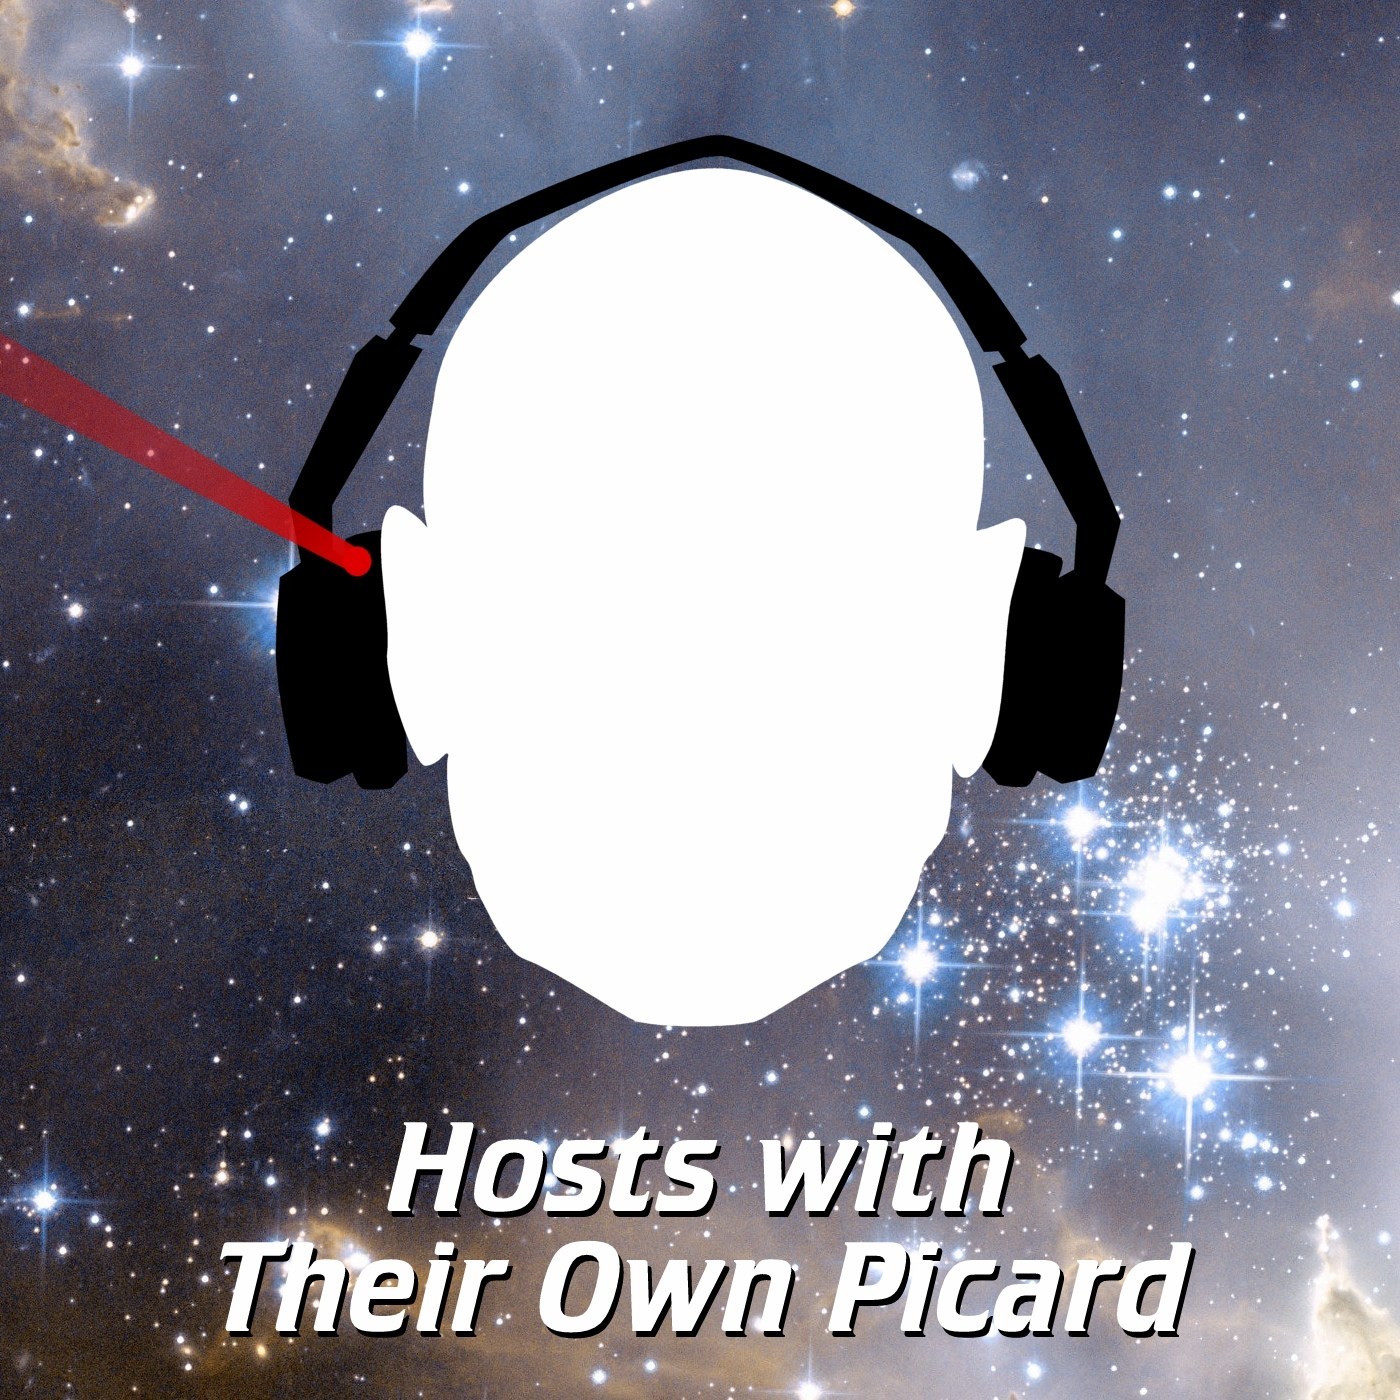 Hosts with Their Own Picard Podcast Episode 01 – Star Trek: Picard Teaser Trailer